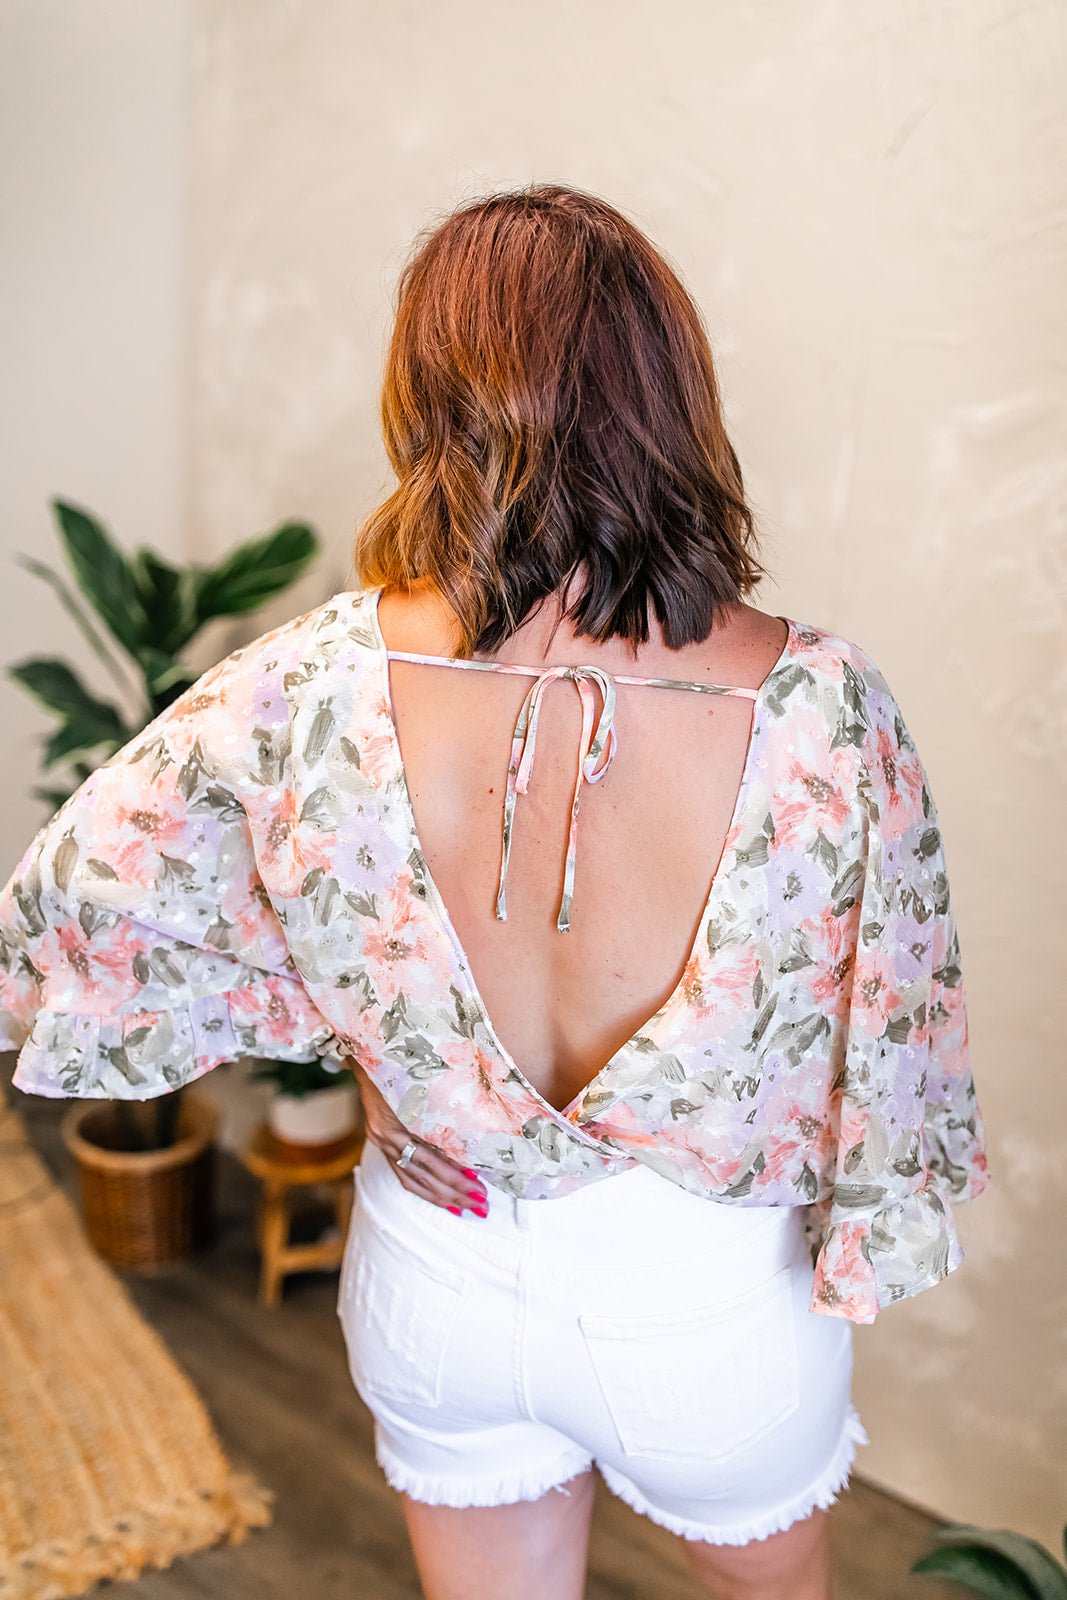 One Eleven Olive Boutique The Rosa Bodysuit Isn't she lovely?! The Rosa Bodysuit features a gorgeous floral detail throughout and a fun flared sleeve detail! This beauty is perfect for summer with it's lightwe